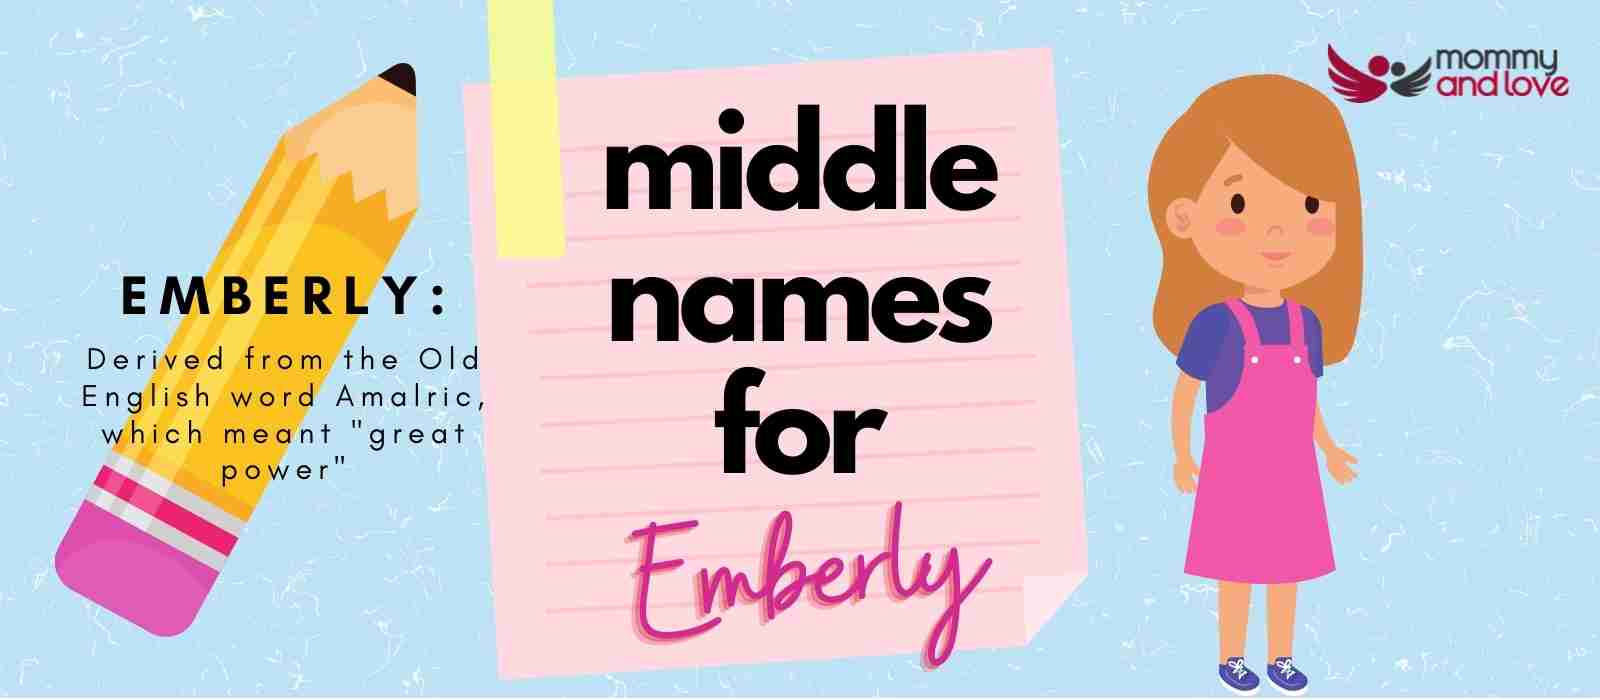 Middle Names for Emberly